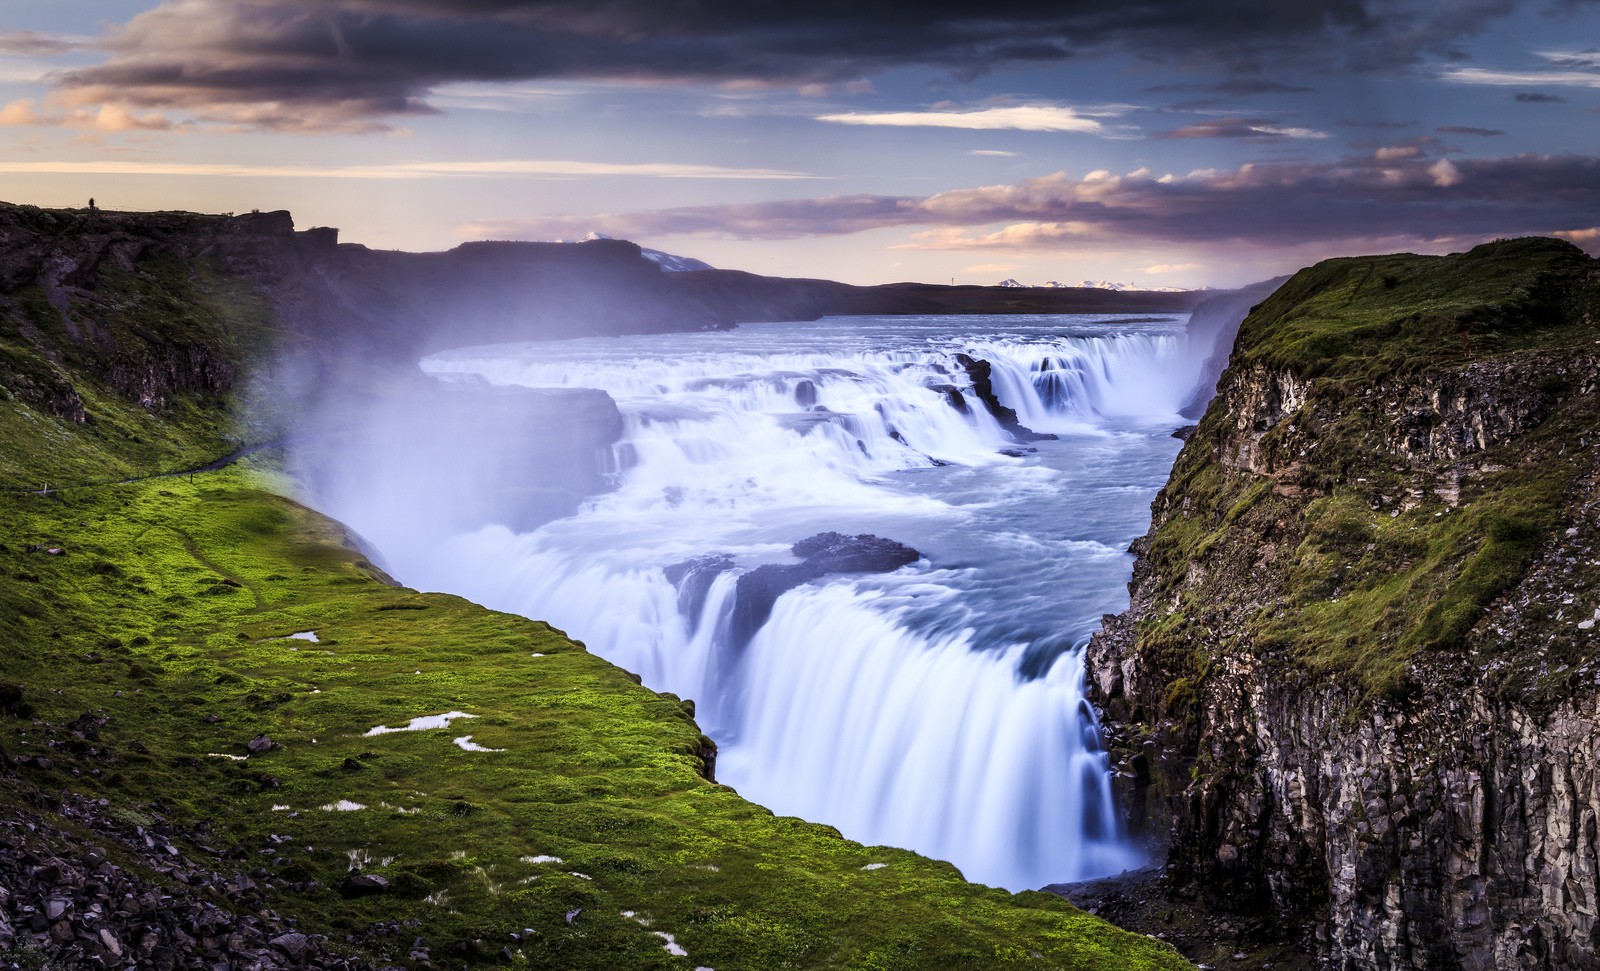 General 1600x971 photography nature landscape mountains lake sky aerial view Iceland Gullfoss Falls waterfall